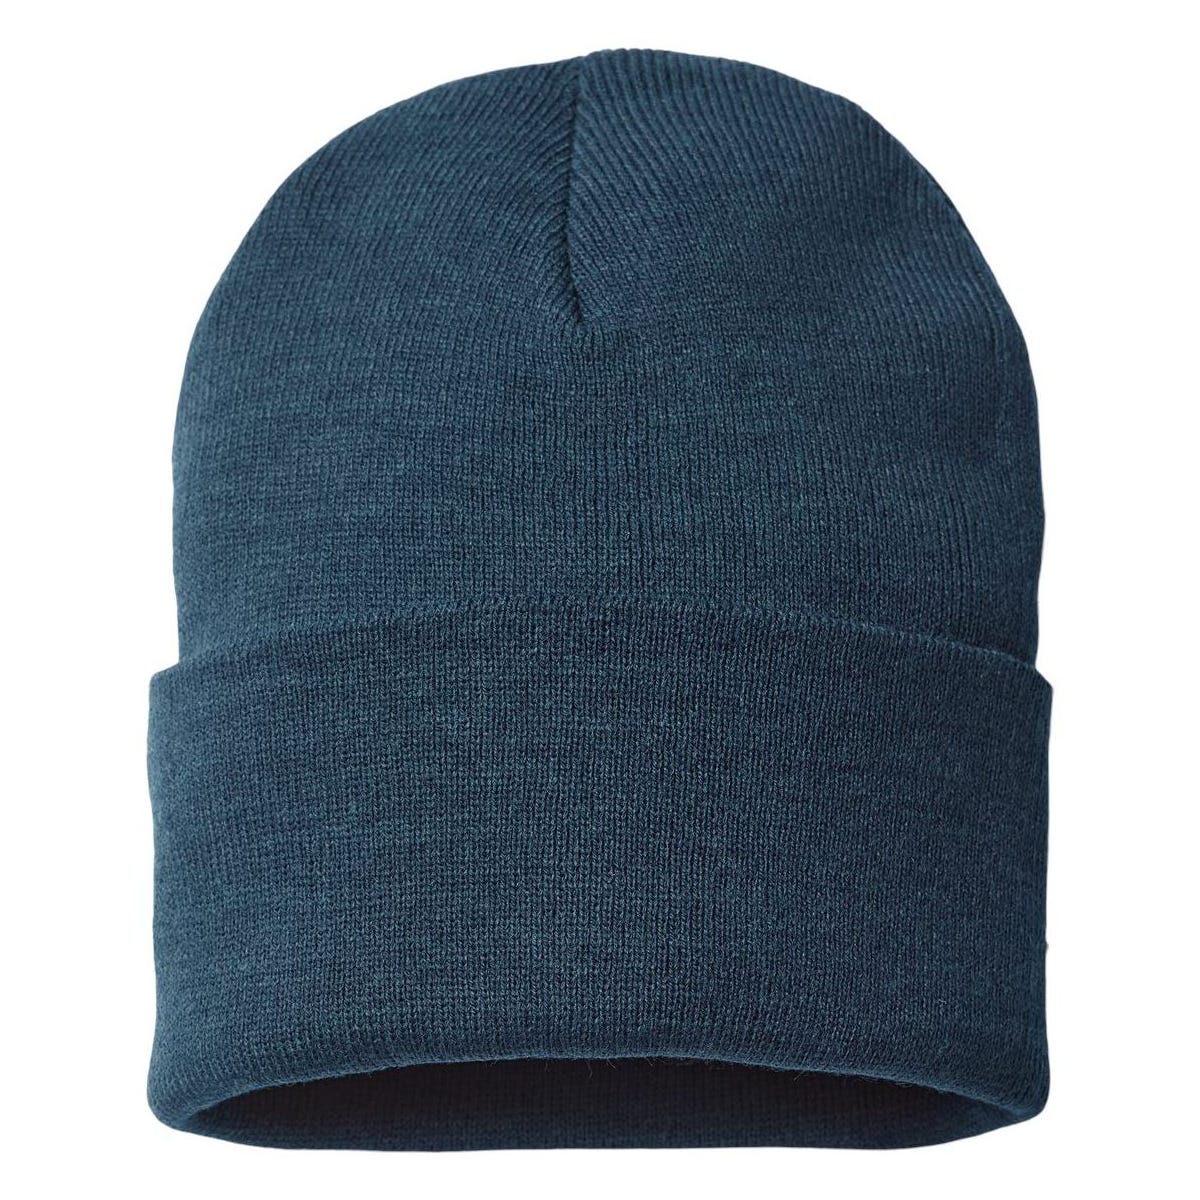 The Grandfather Logo Father's Day Sustainable Knit Beanie